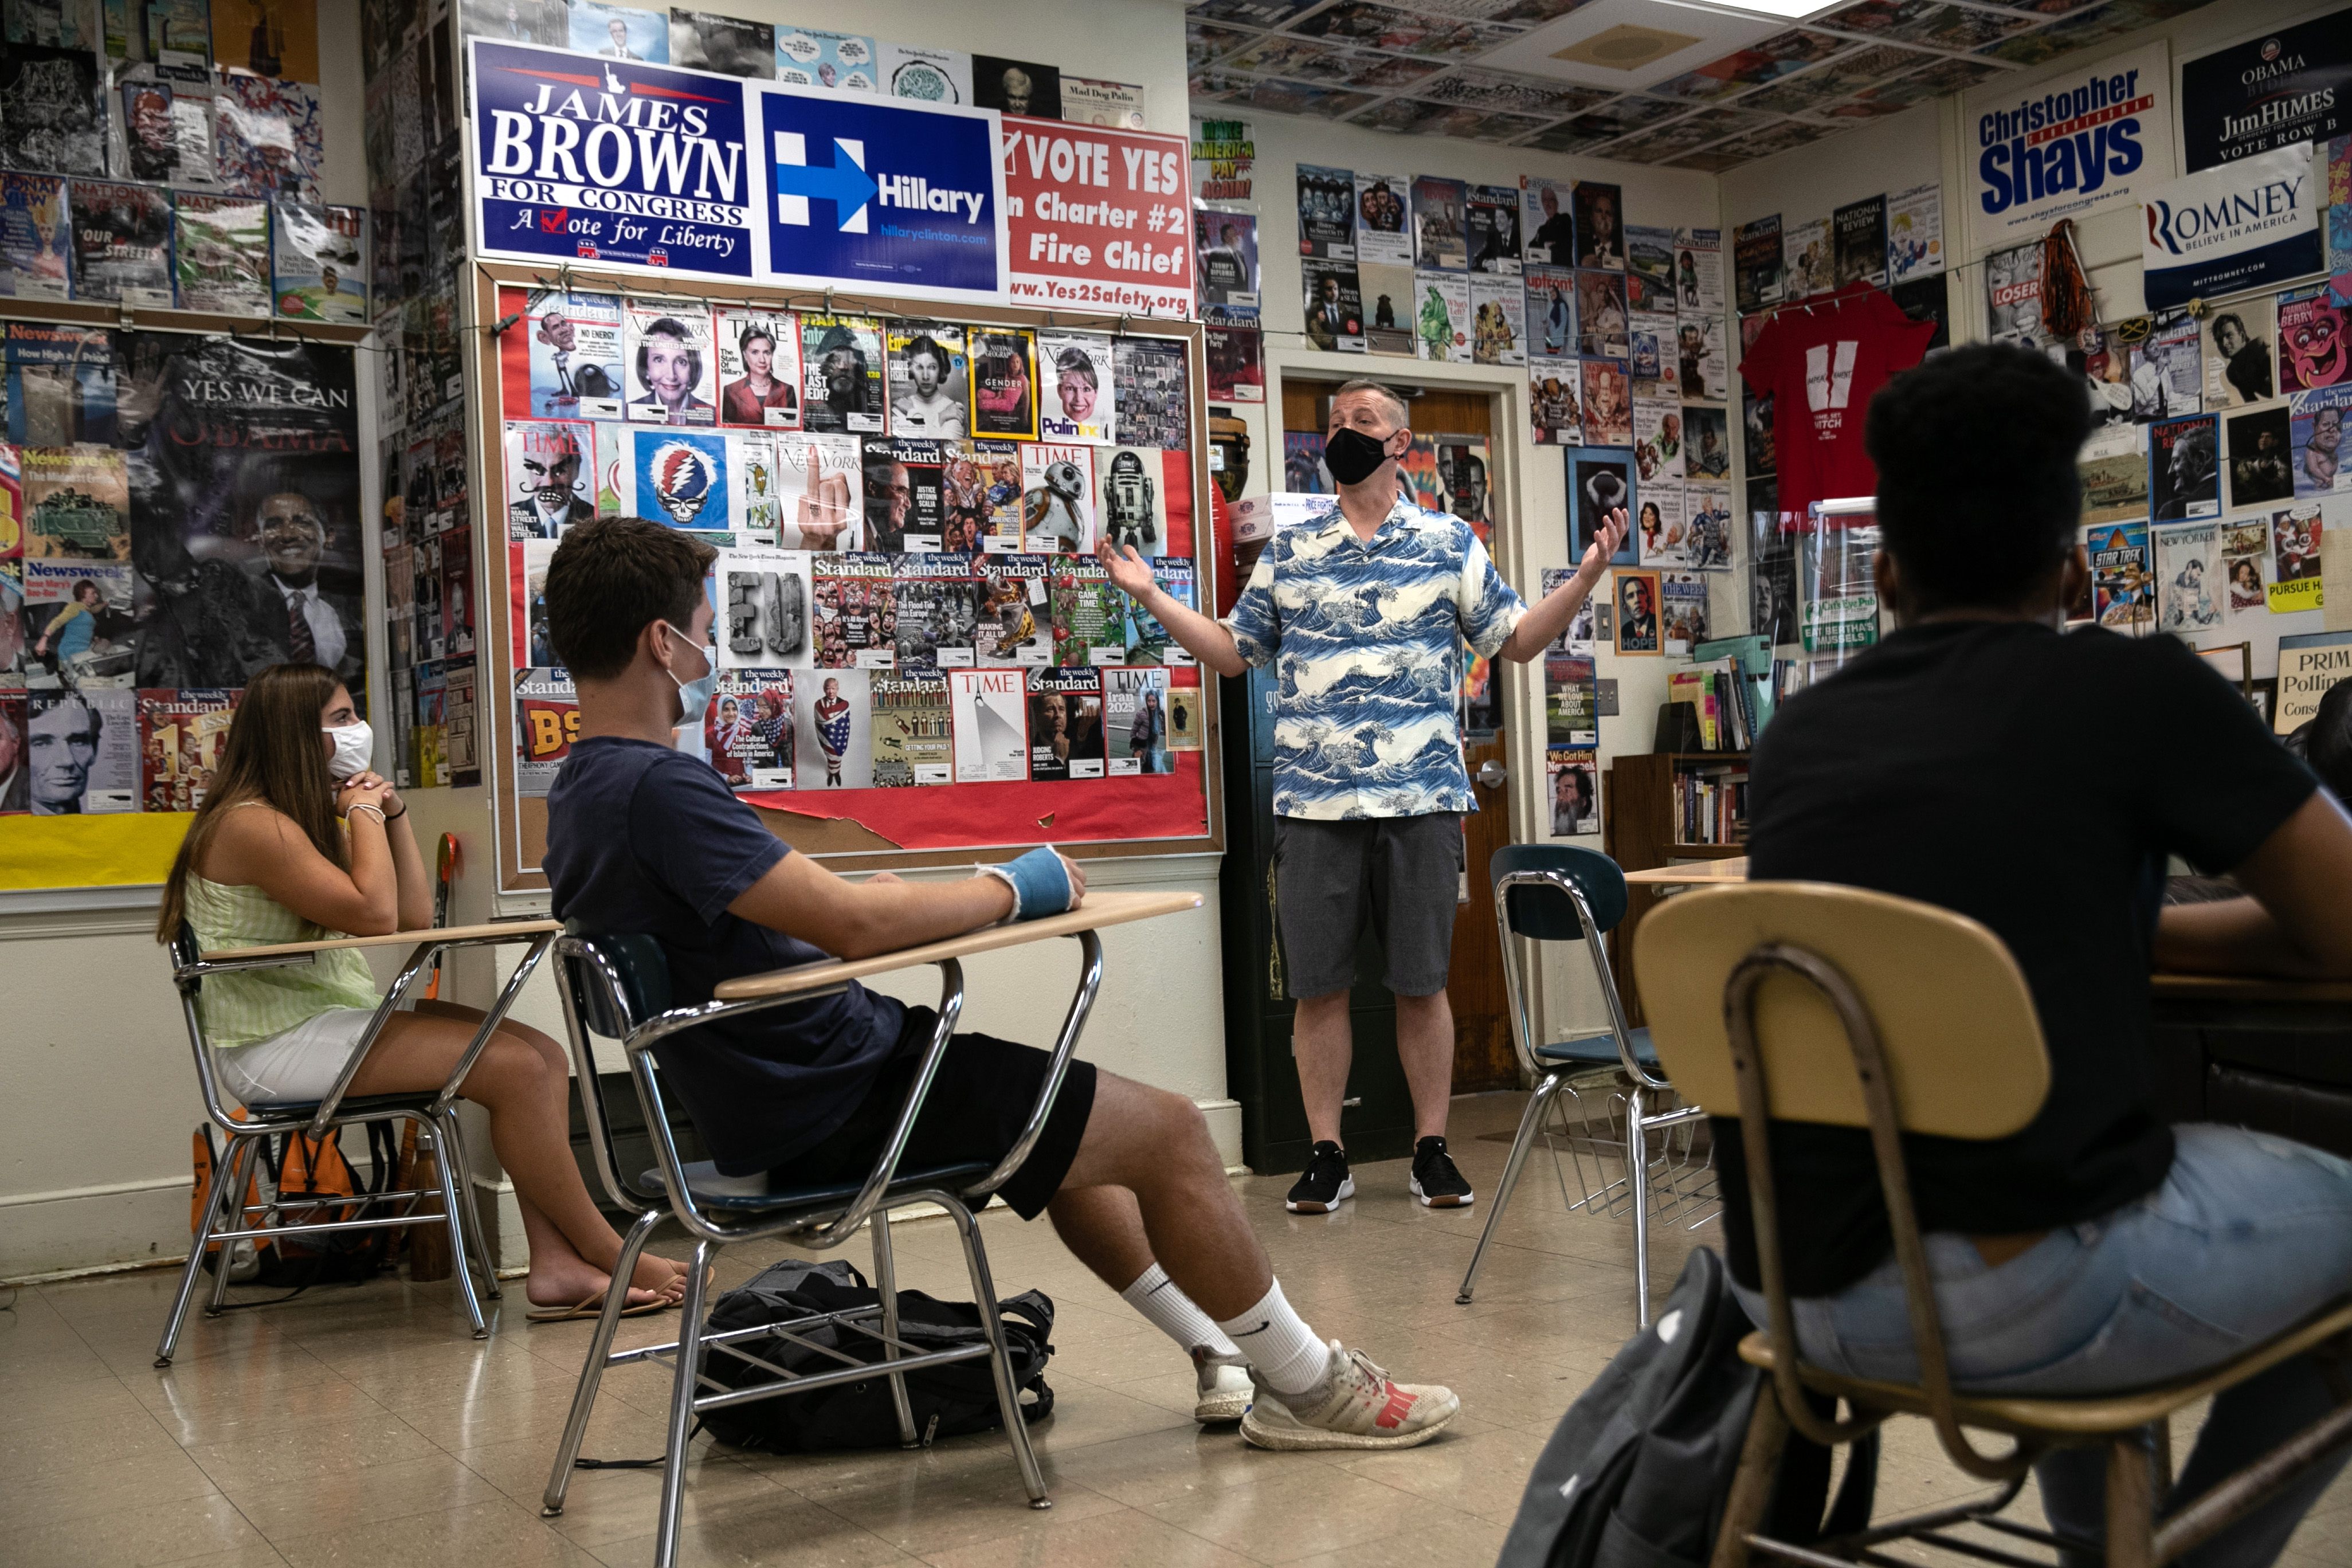 Honors civics teacher Mike Brown discusses the U.S. presidential election with masked students on the first day of school at Stamford High School on Sept. 8, 2020 in Stamford, Connecticut. (John Moore—Getty Images)